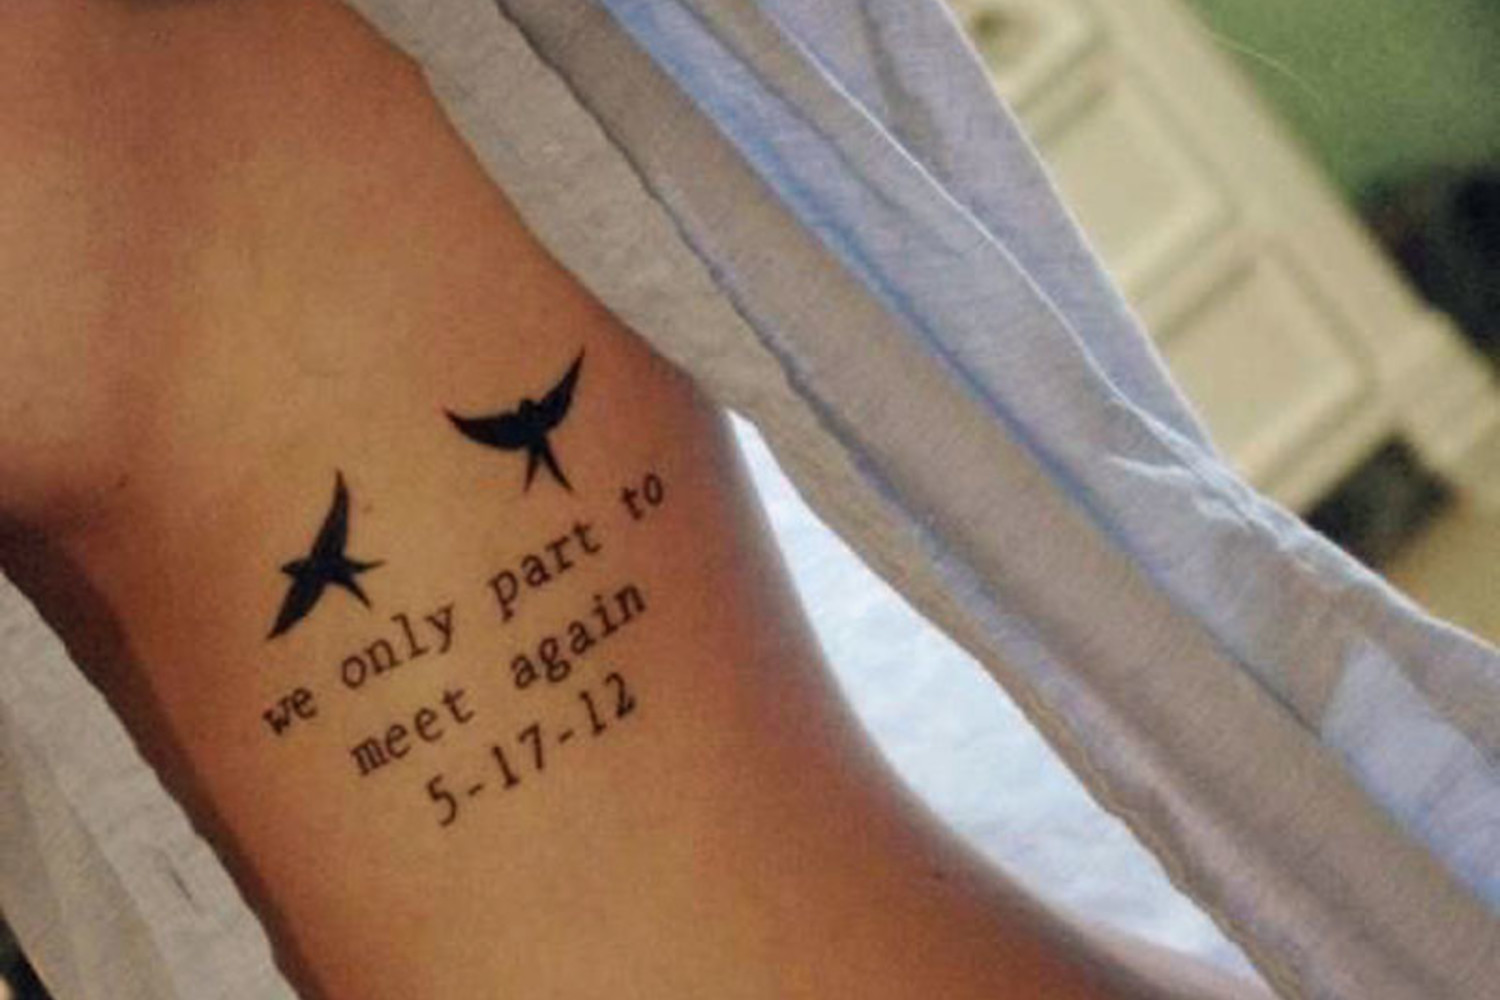 35 Miscarriage Tattoo Ideas To Express Your Loss